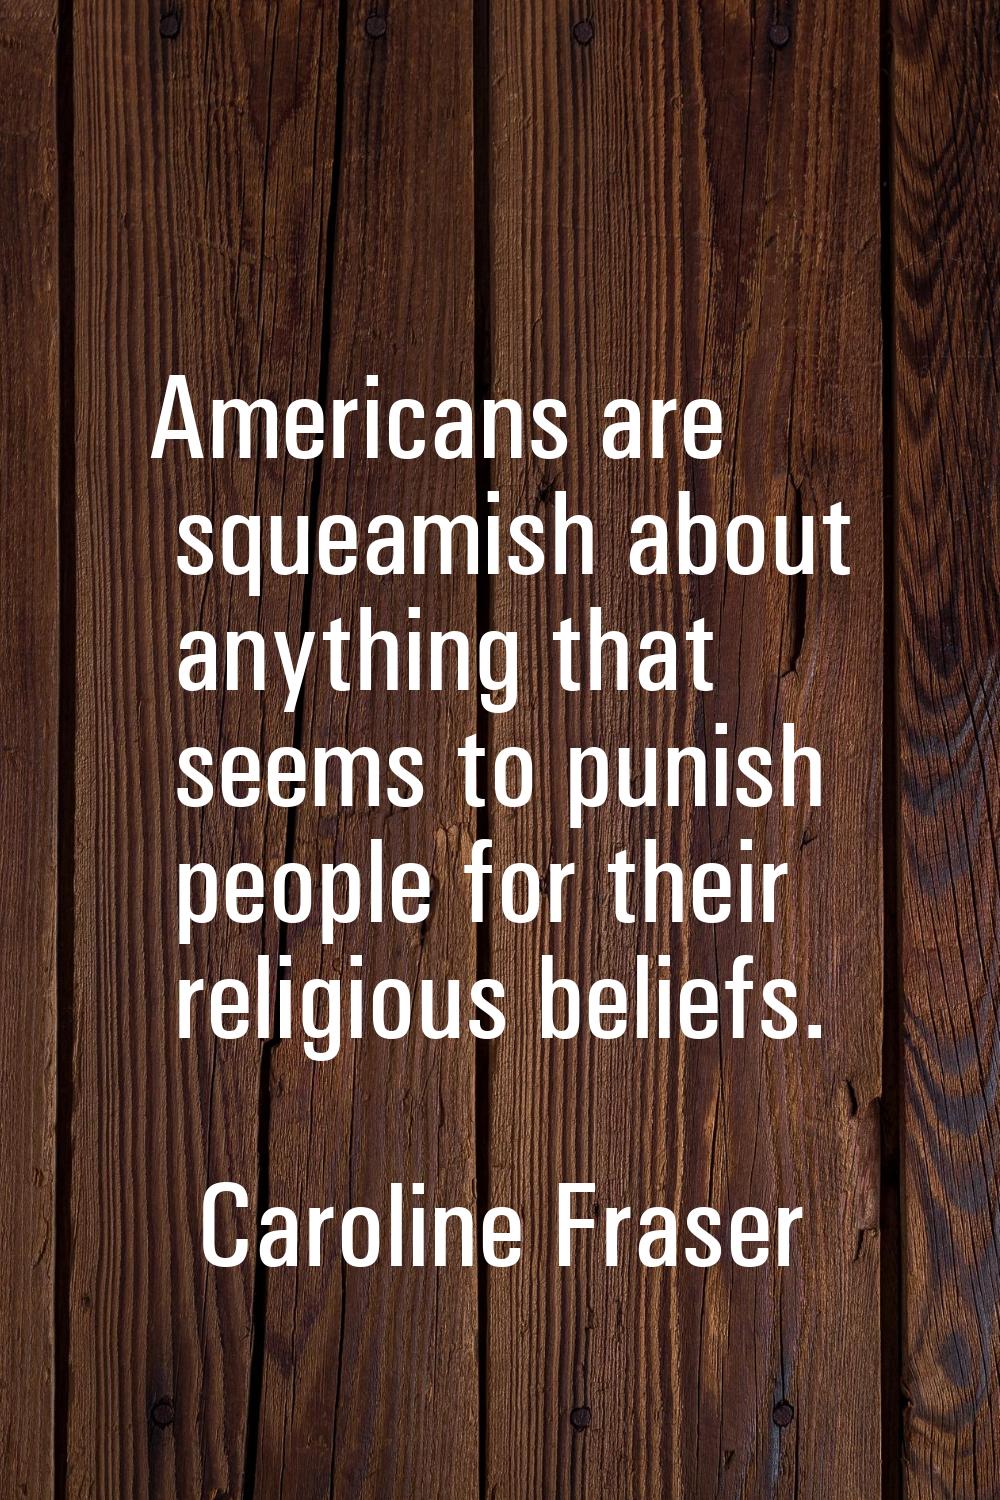 Americans are squeamish about anything that seems to punish people for their religious beliefs.